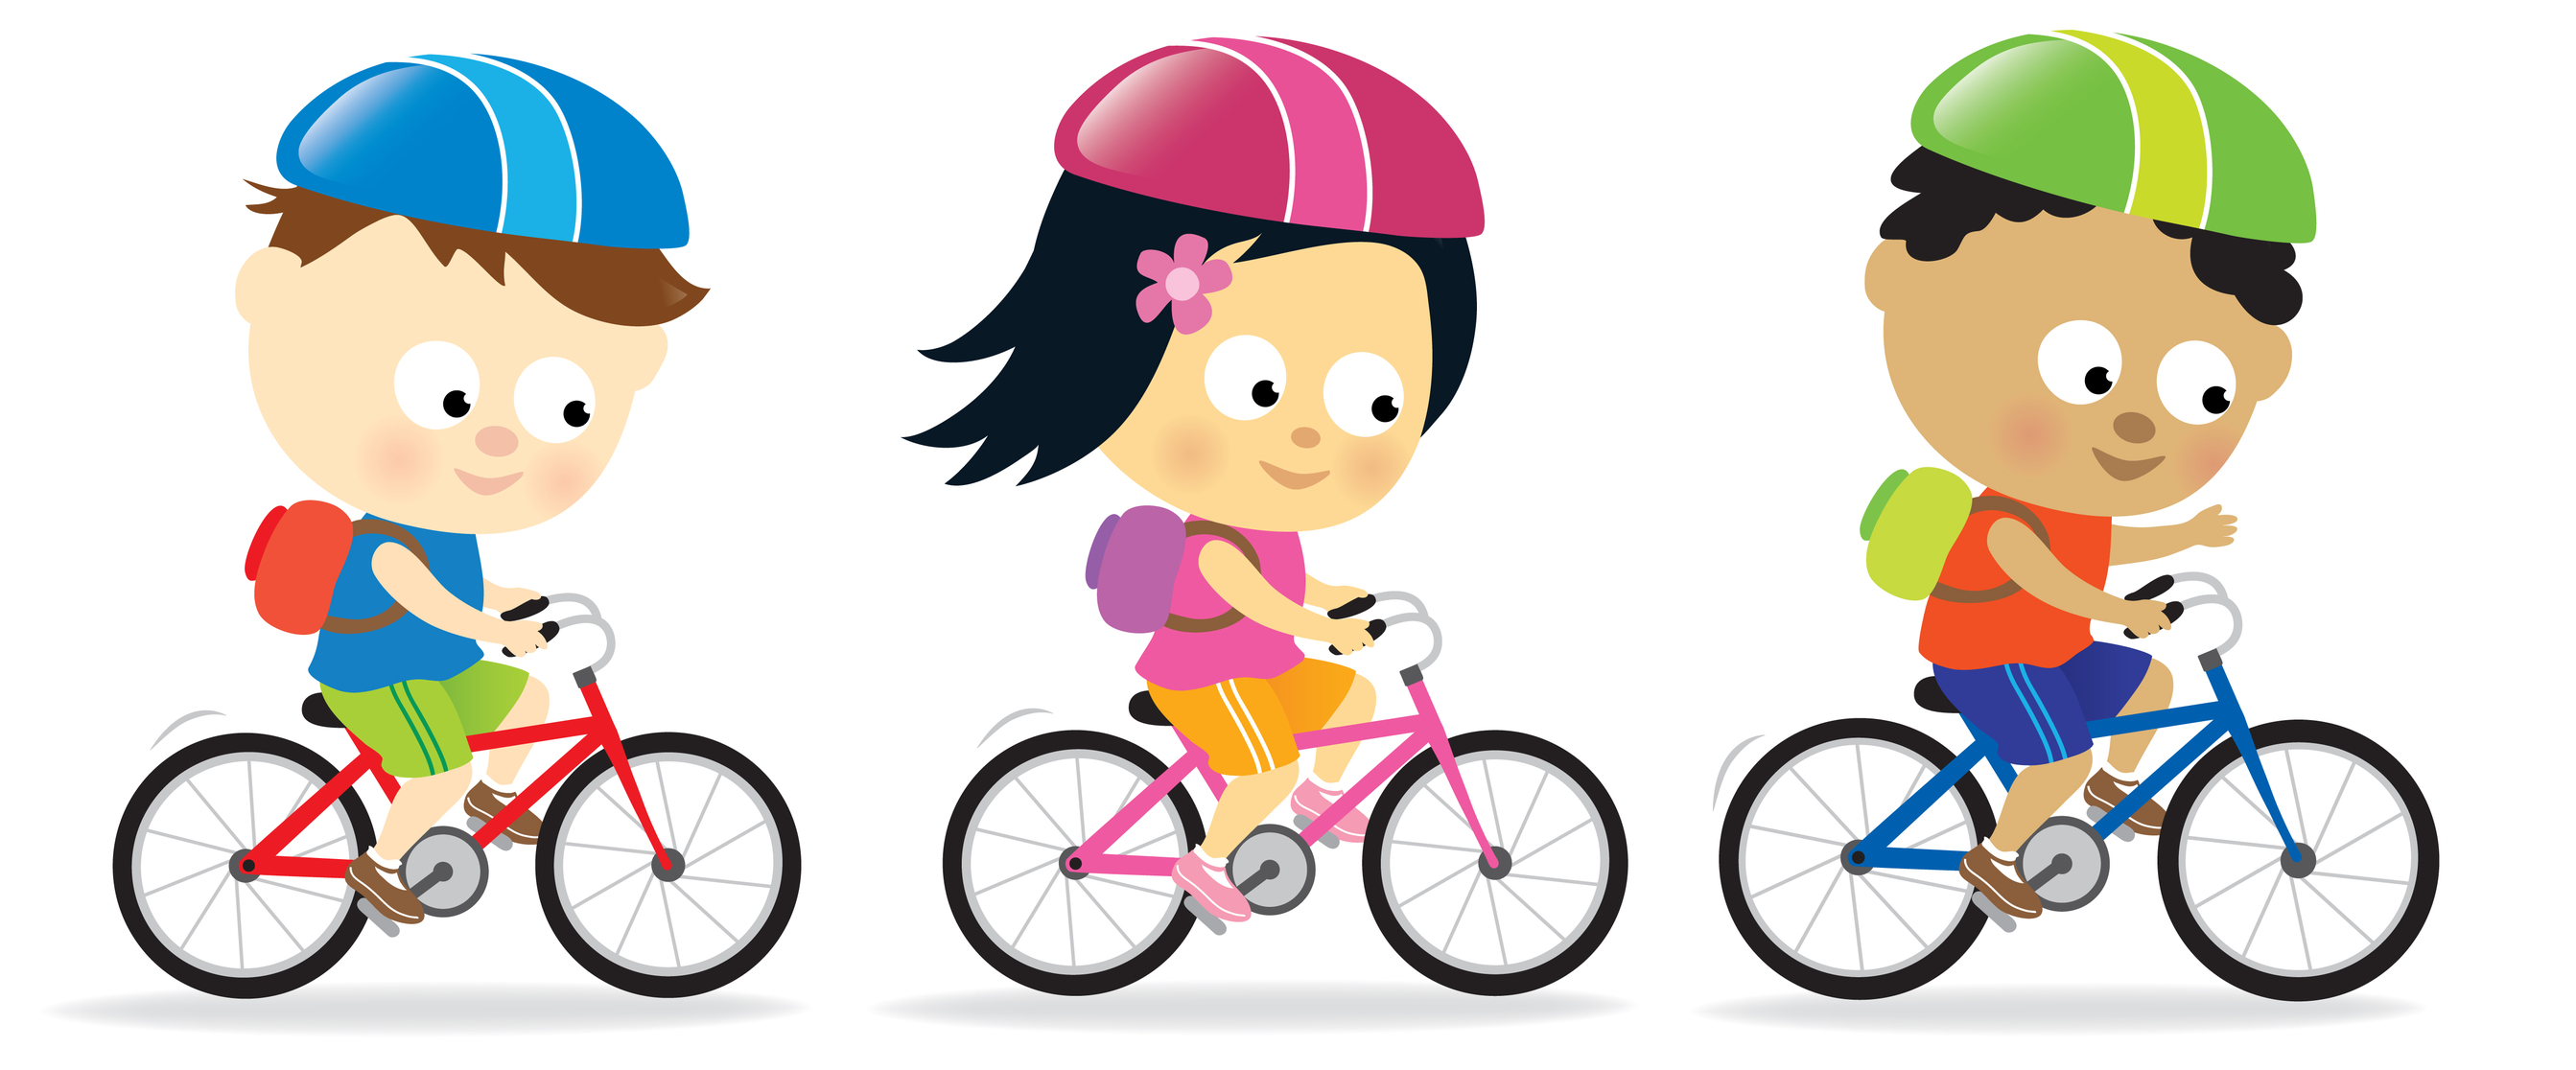 Bicycle safety clipart - Clipartix